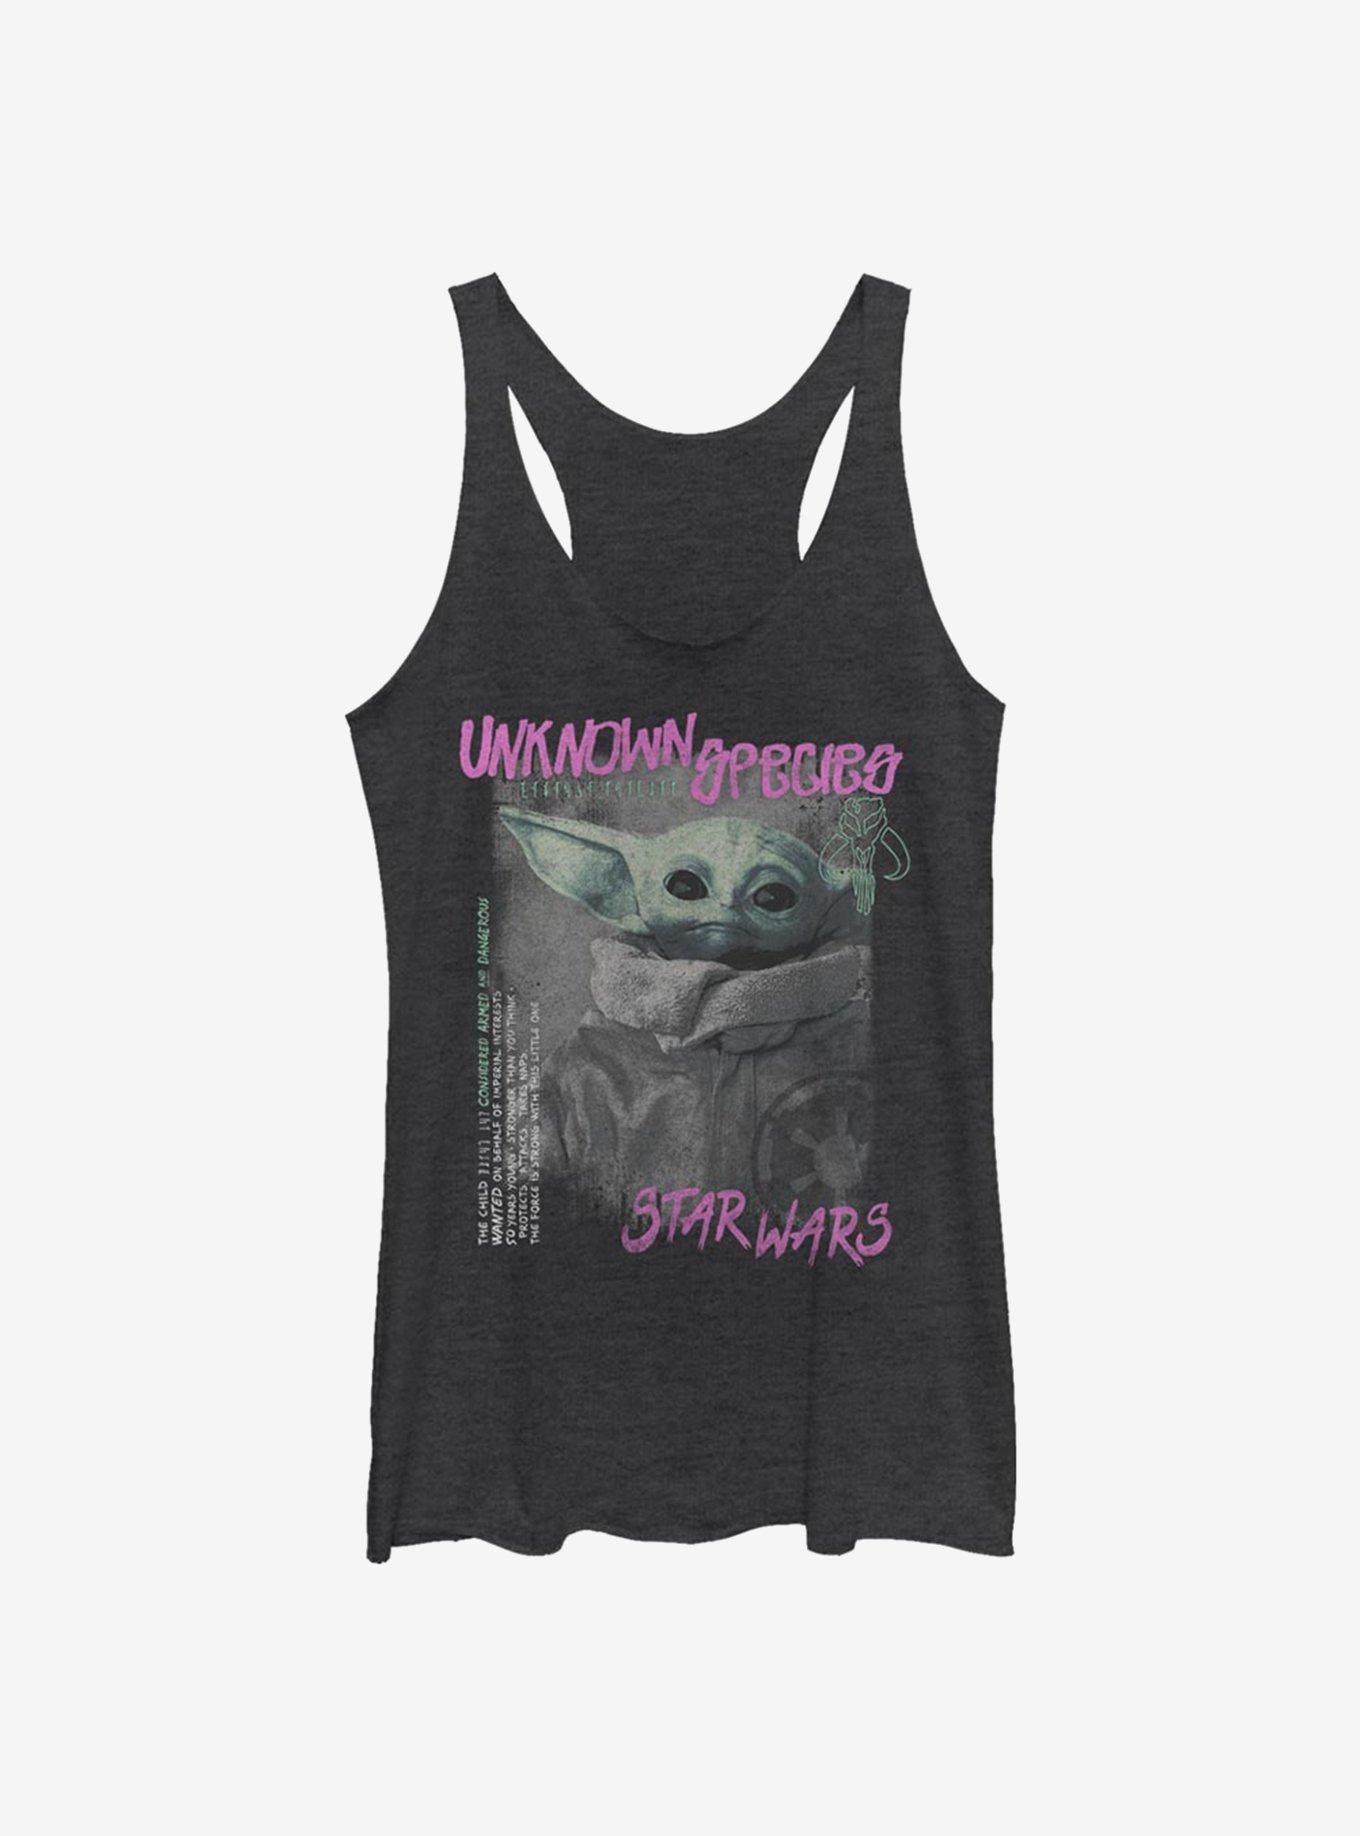 Star Wars The Mandalorian The Child Unknown Species Womens Tank Top, BLK HTR, hi-res